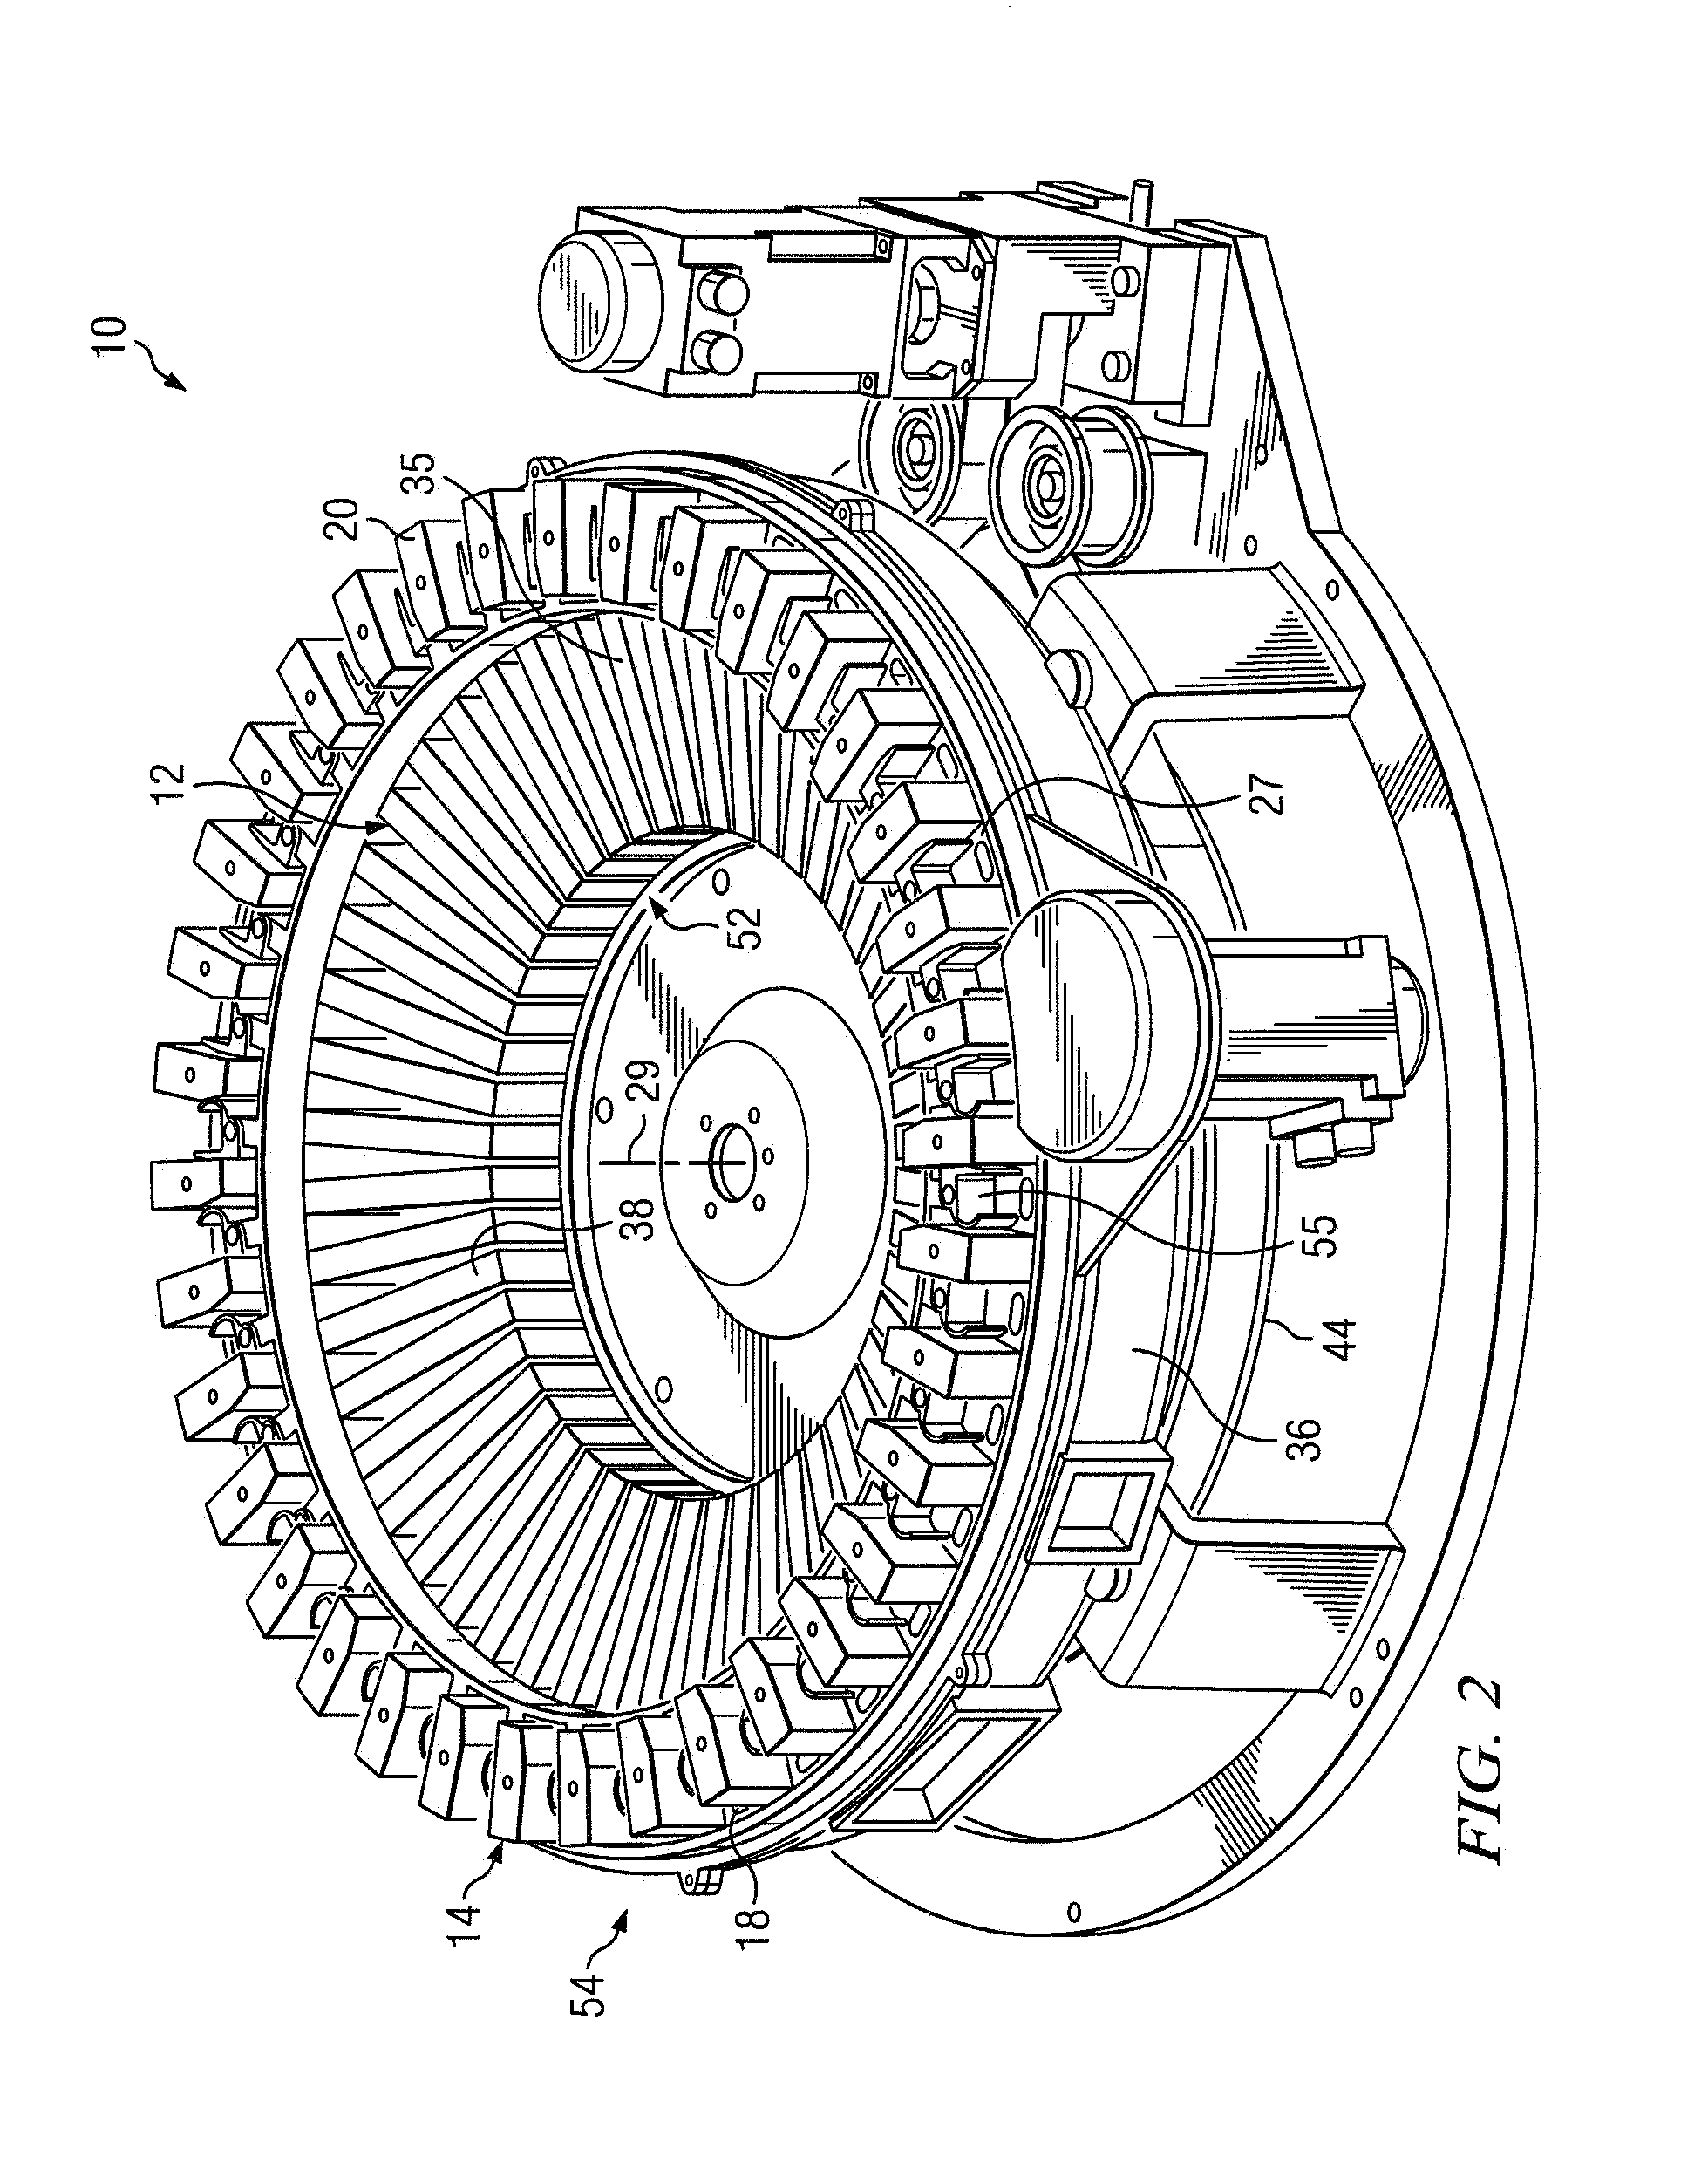 Rotary Reagent Tray Assembly and Method of Mixing Solid-Phase Reagents